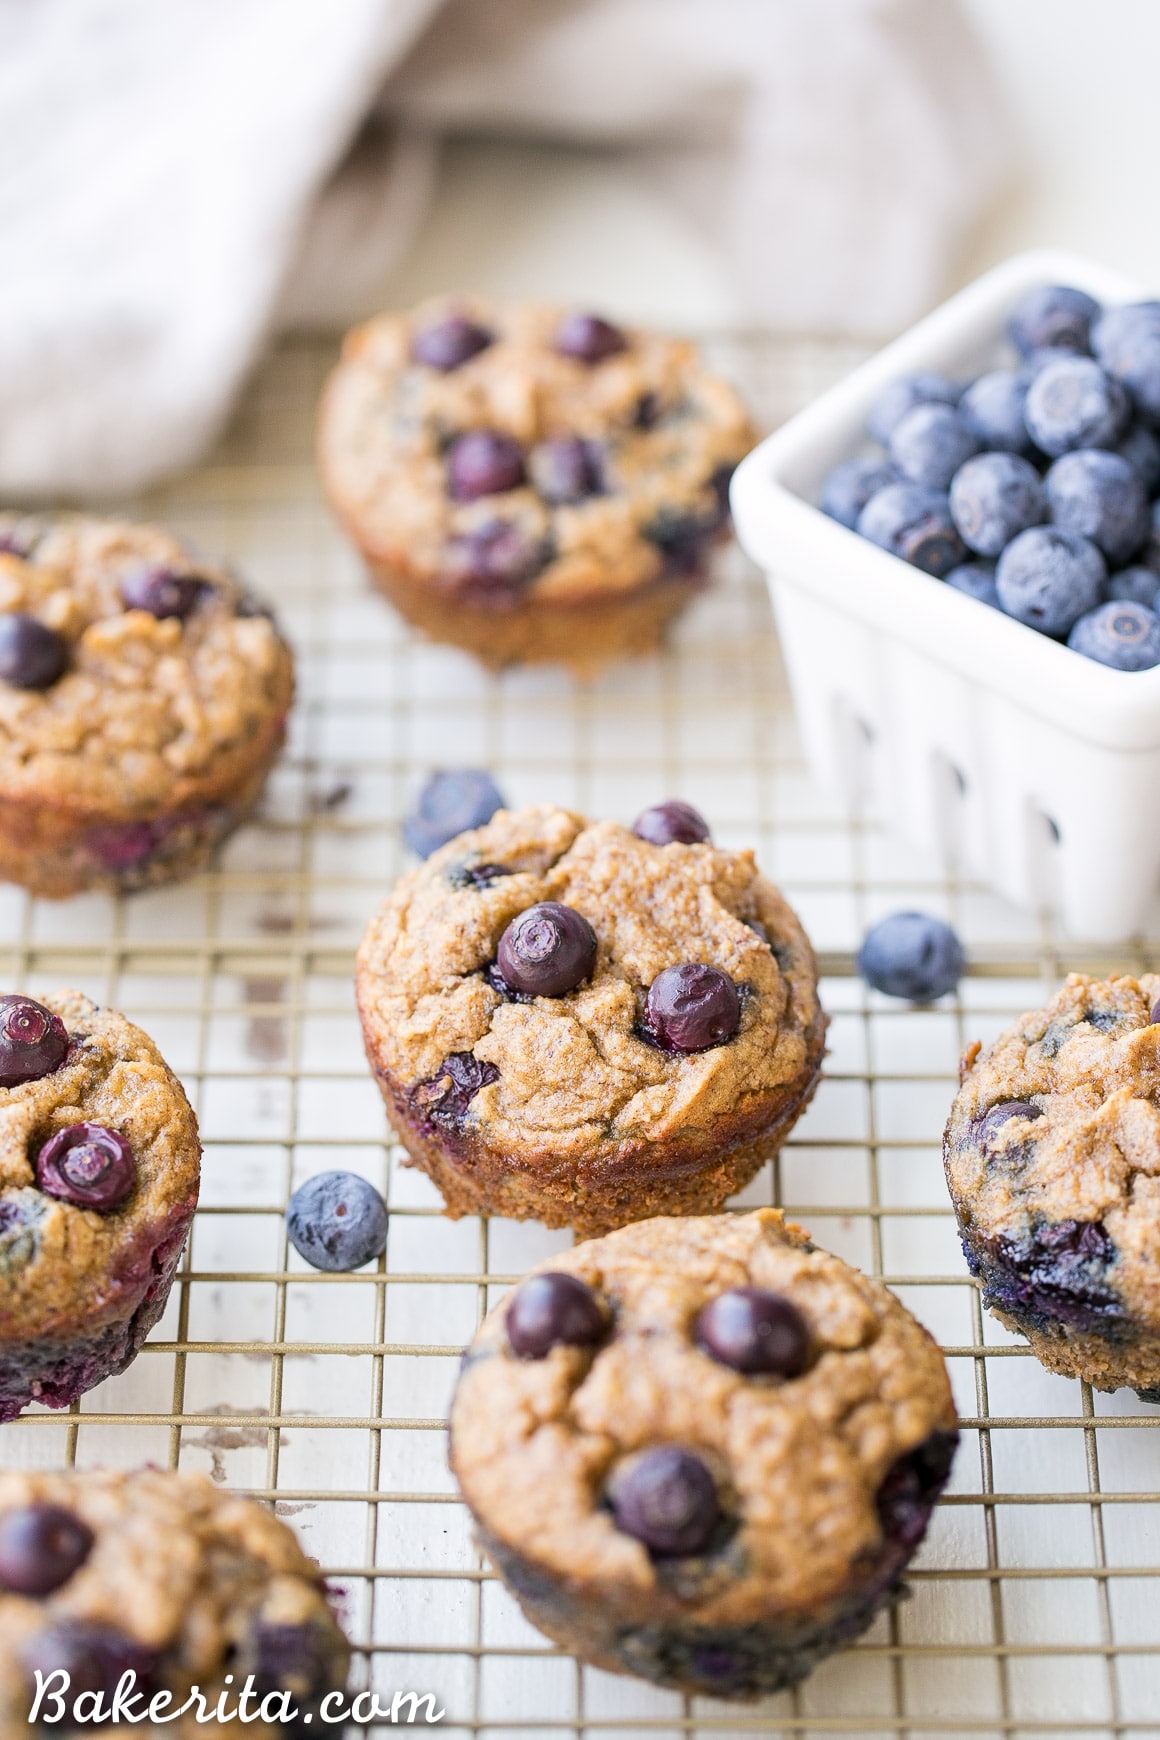 These Paleo Banana Blueberry Muffins are moist, sweet, and make the perfect quick snack or easy breakfast. They're gluten-free, grain-free and sweetened only with bananas - they also freeze super well, so they're great for meal prepping!